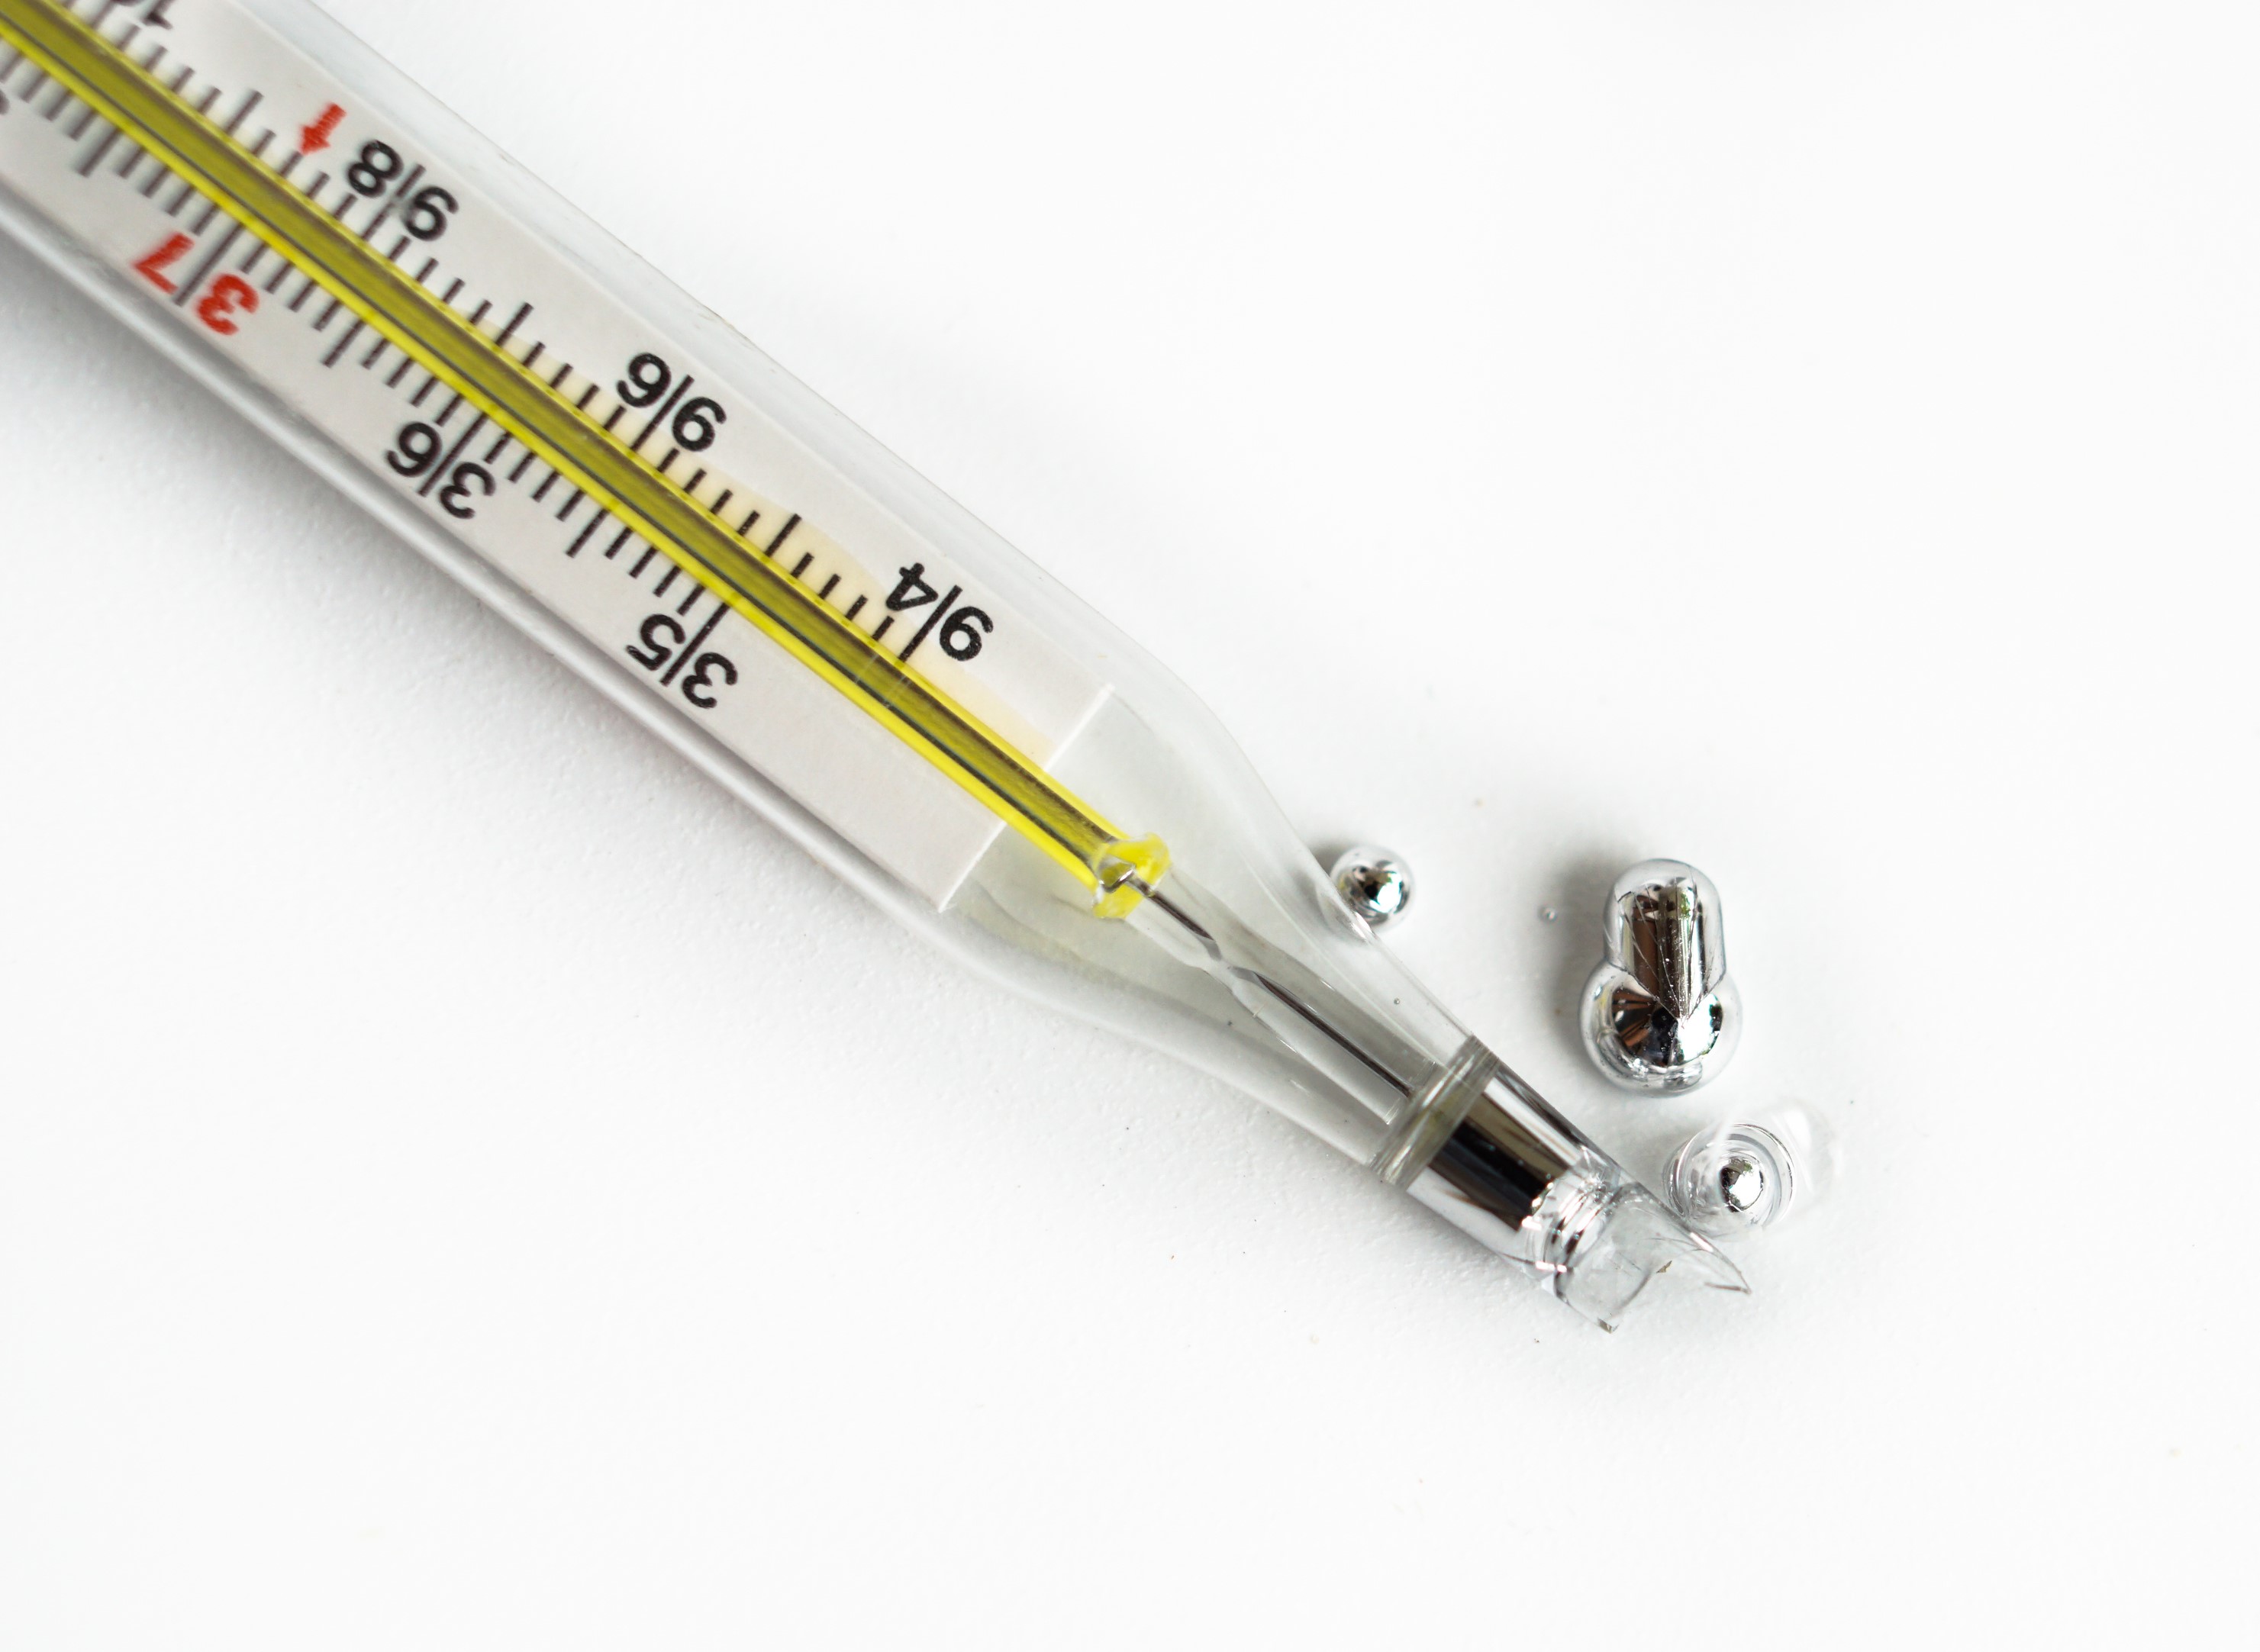 An image of a broken mercury-containing thermometer.